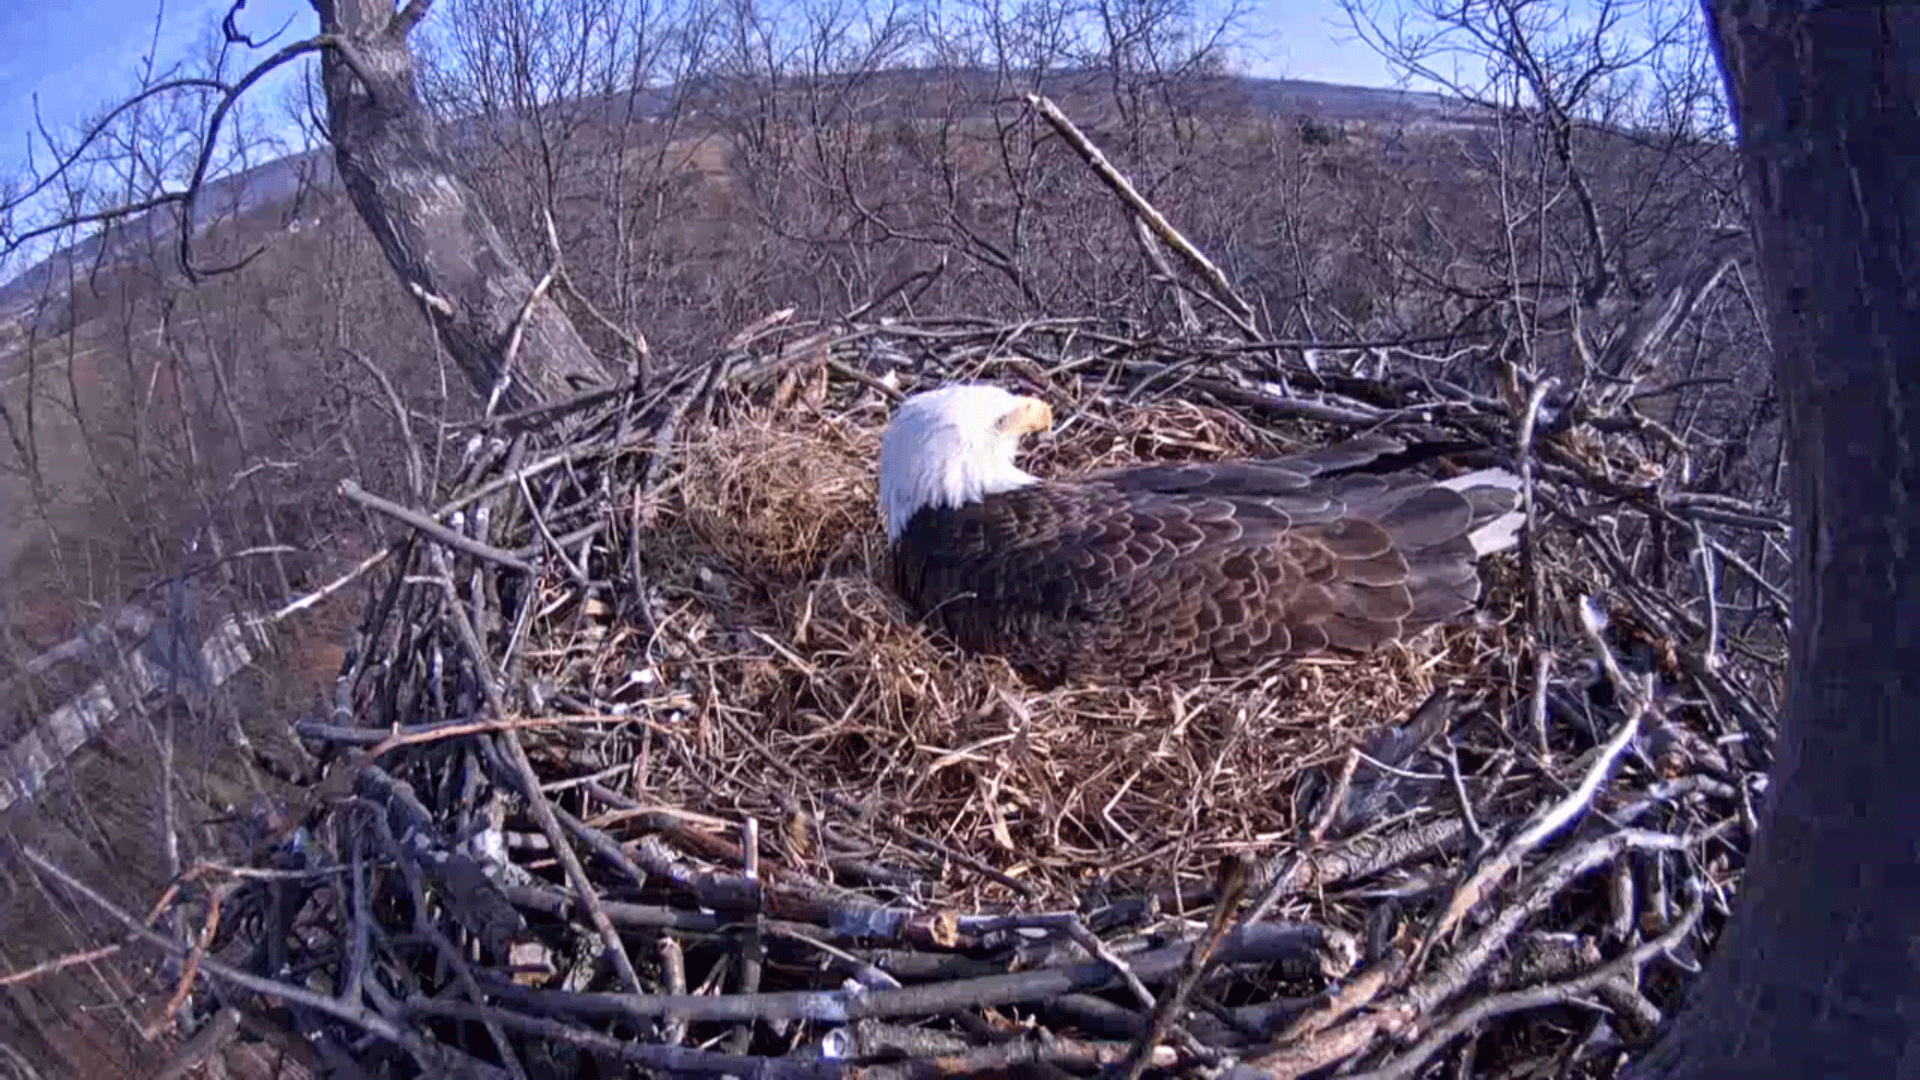 Dedicated bald eagle continues to tend to eggs as hatching begins